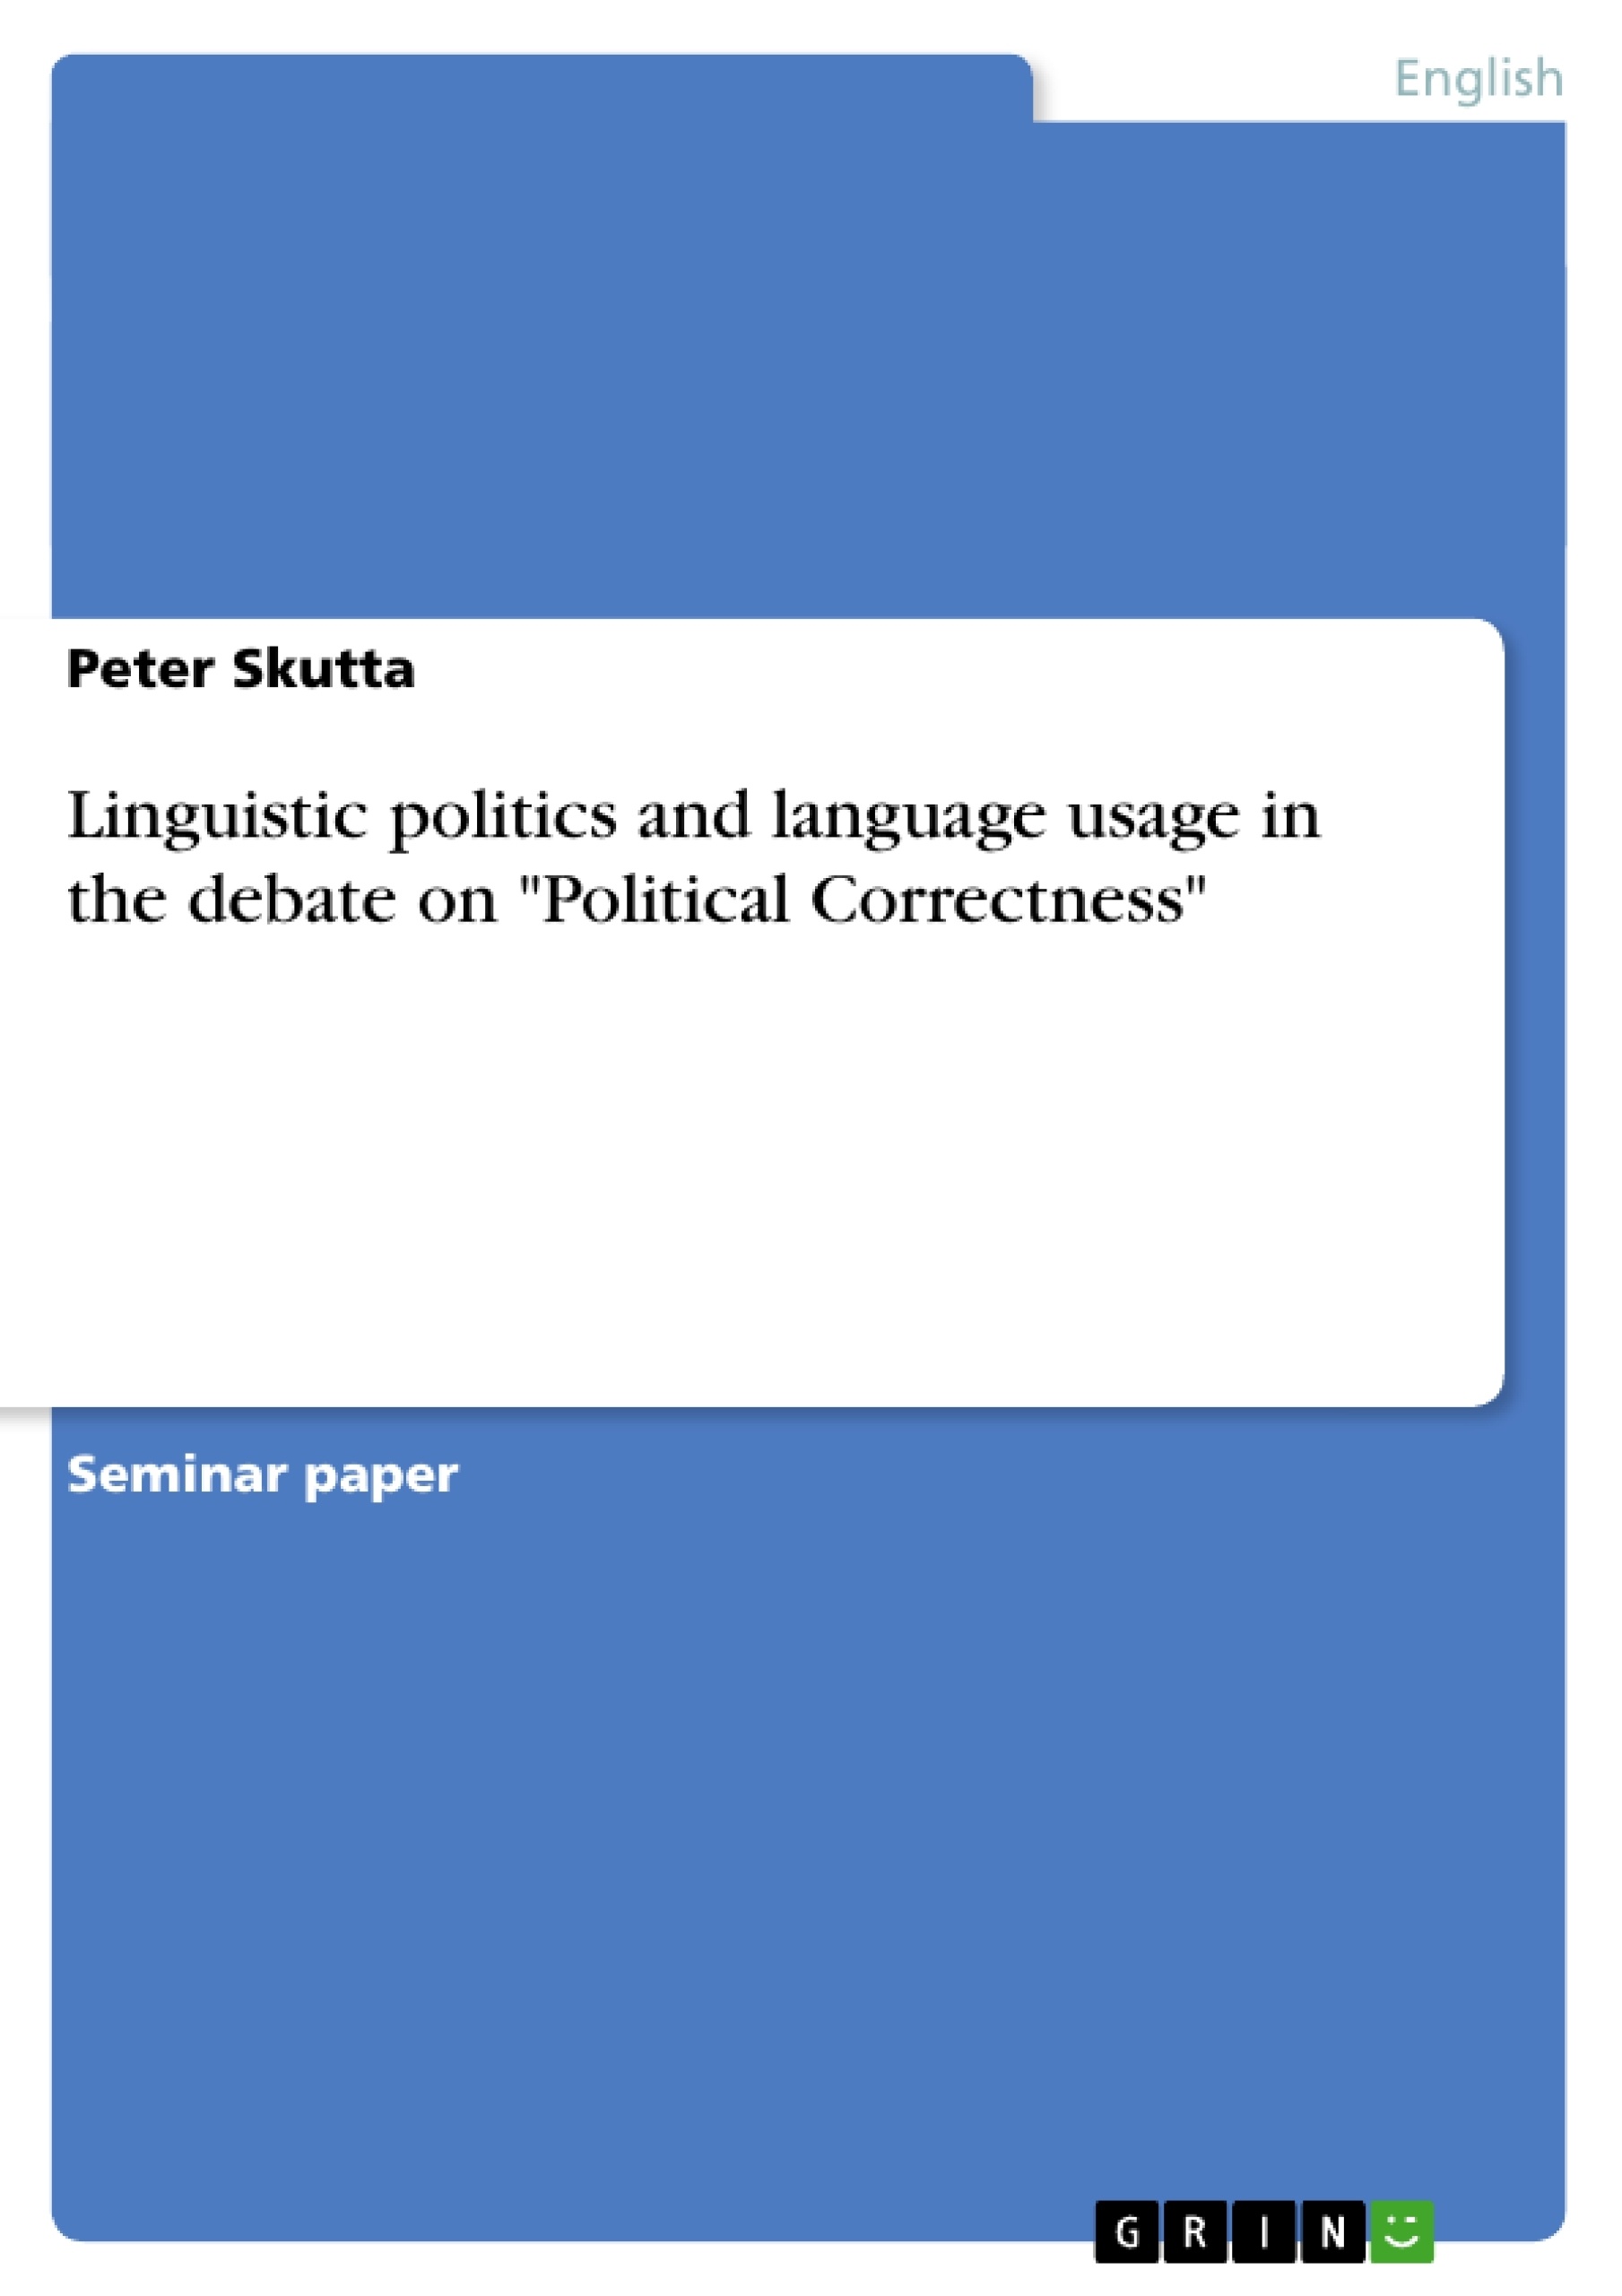 Título: Linguistic politics and language usage in the debate on "Political Correctness"